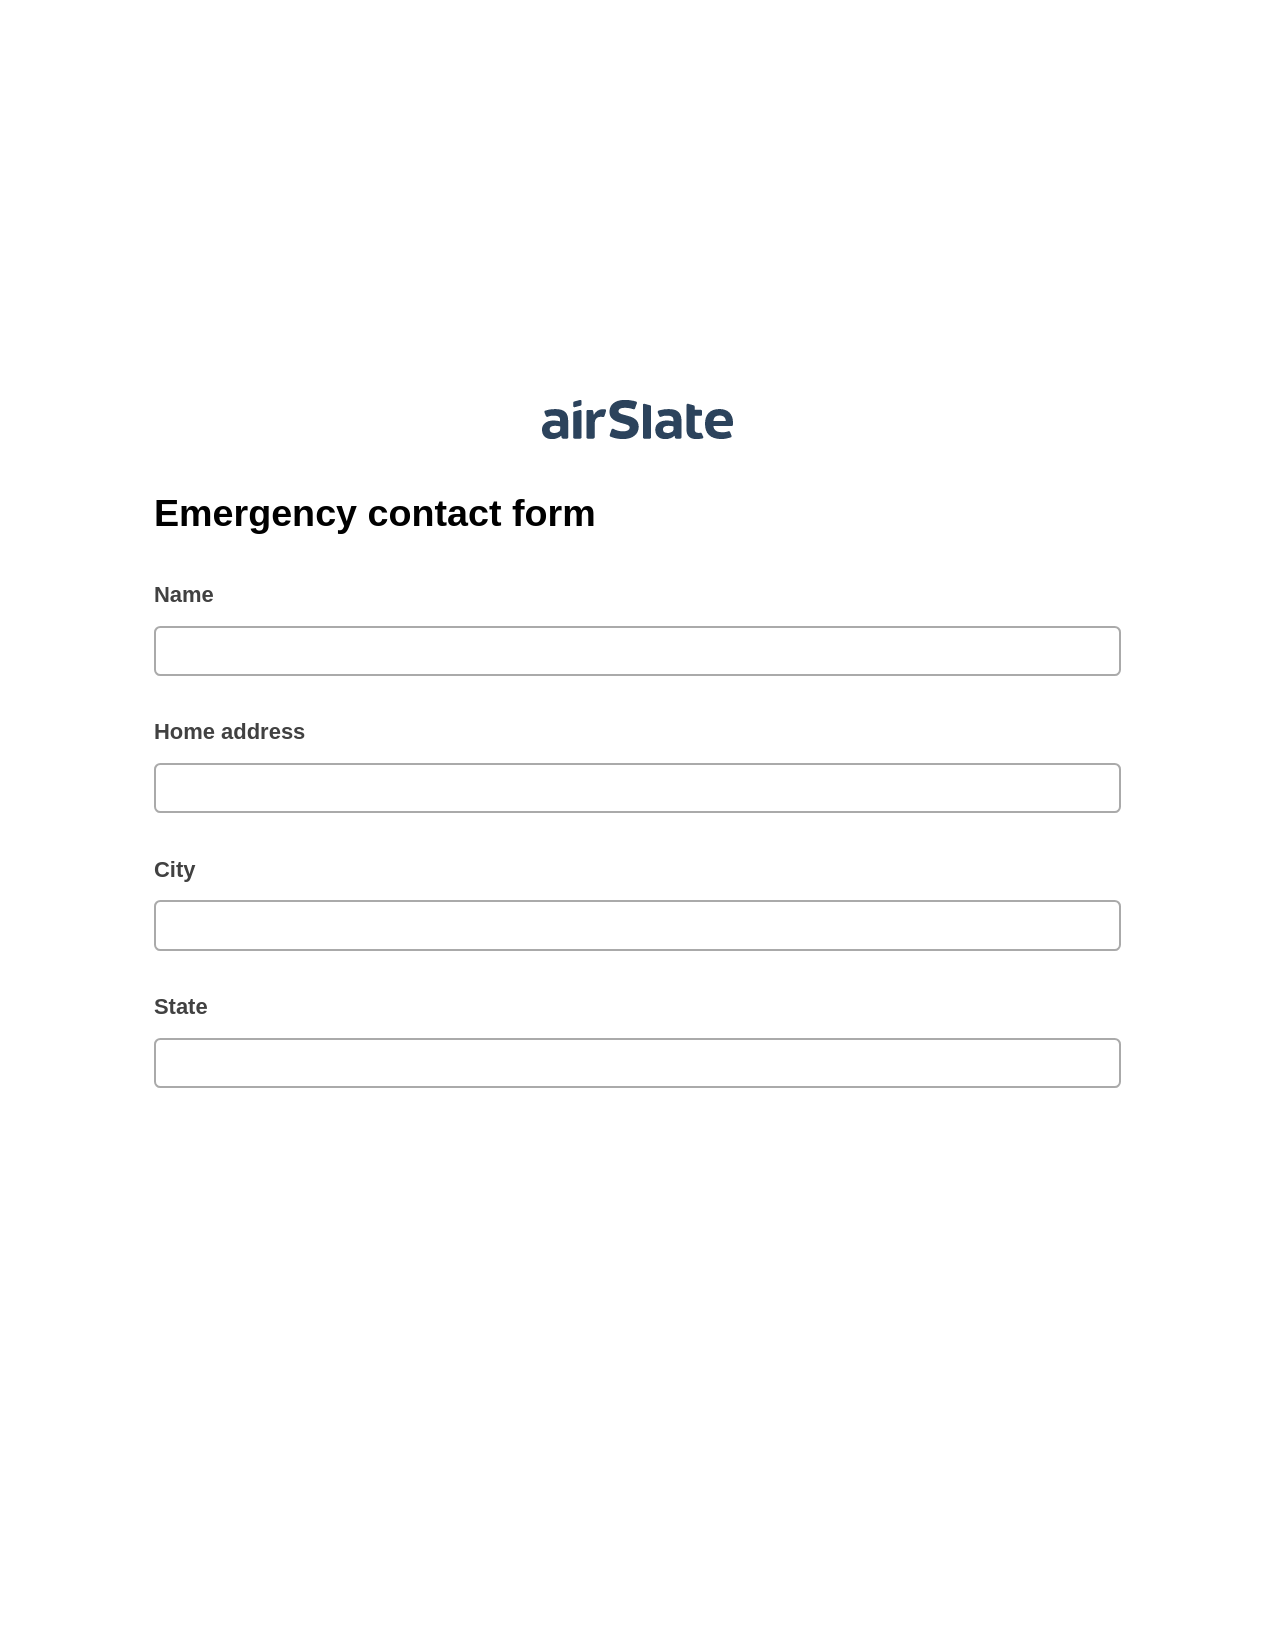 Emergency contact form Pre-fill from Google Sheet Dropdown Options Bot, Update NetSuite Records Bot, Export to NetSuite Record Bot